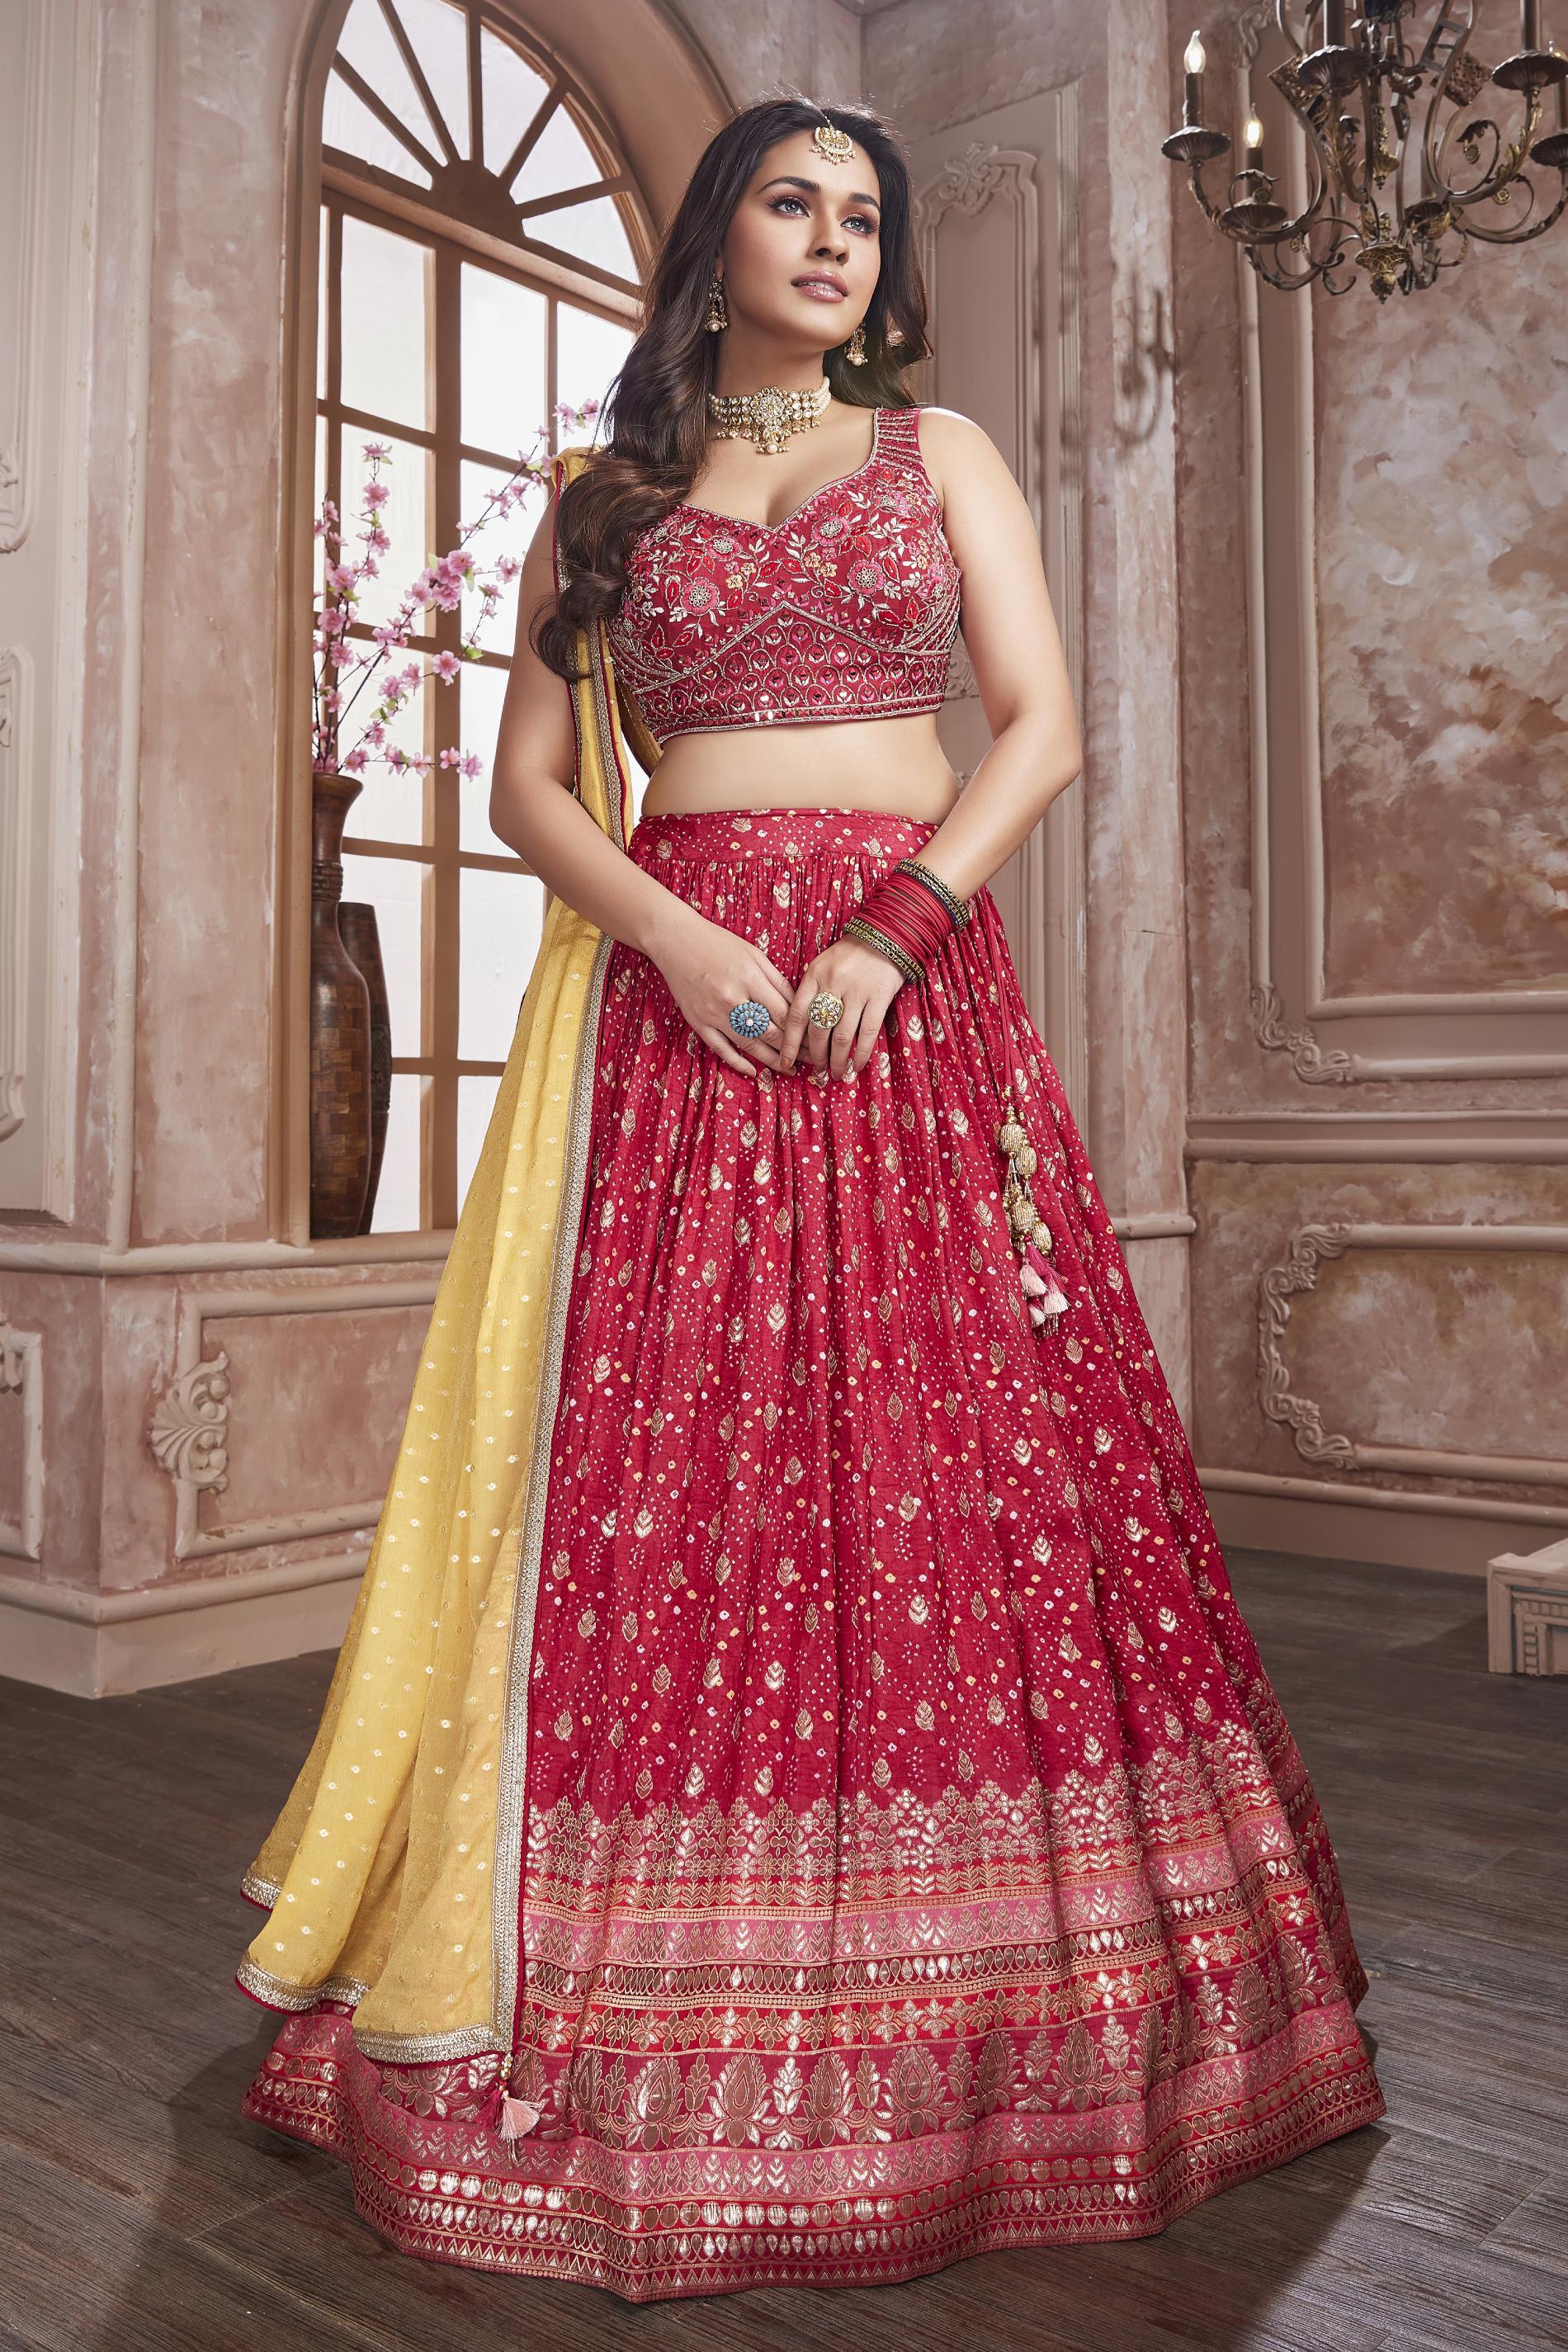 Wedding Season? Here Are 7 Best Places to Buy Lehengas From in Delhi